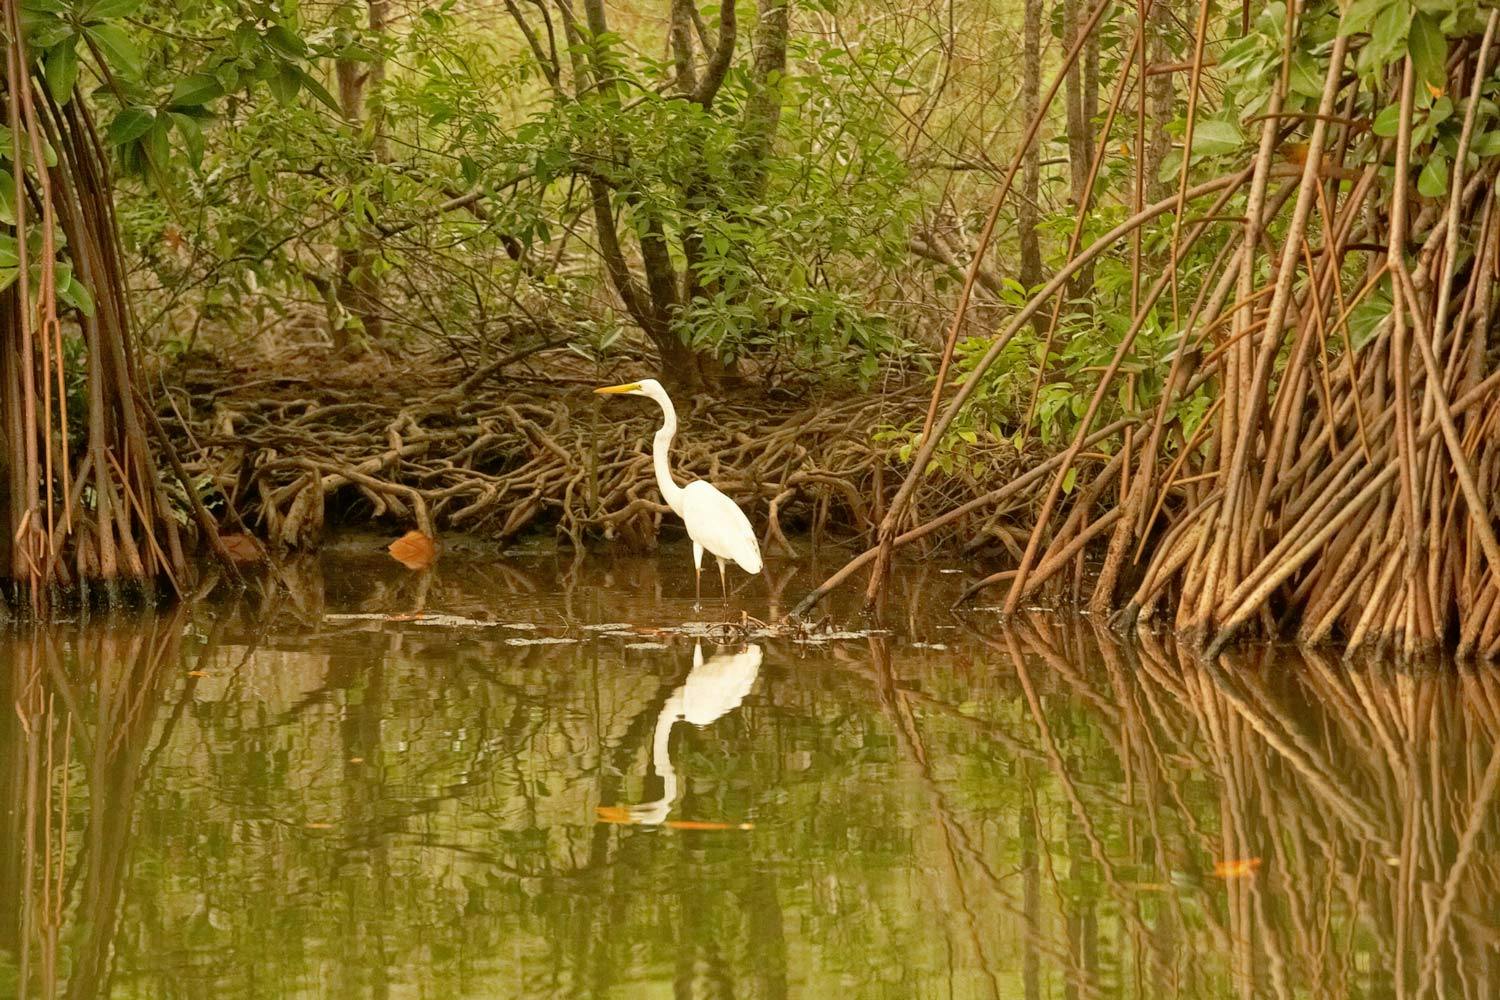 A large, long-necked white bird with a yellow beak wades through murky water in a mangrove forest.